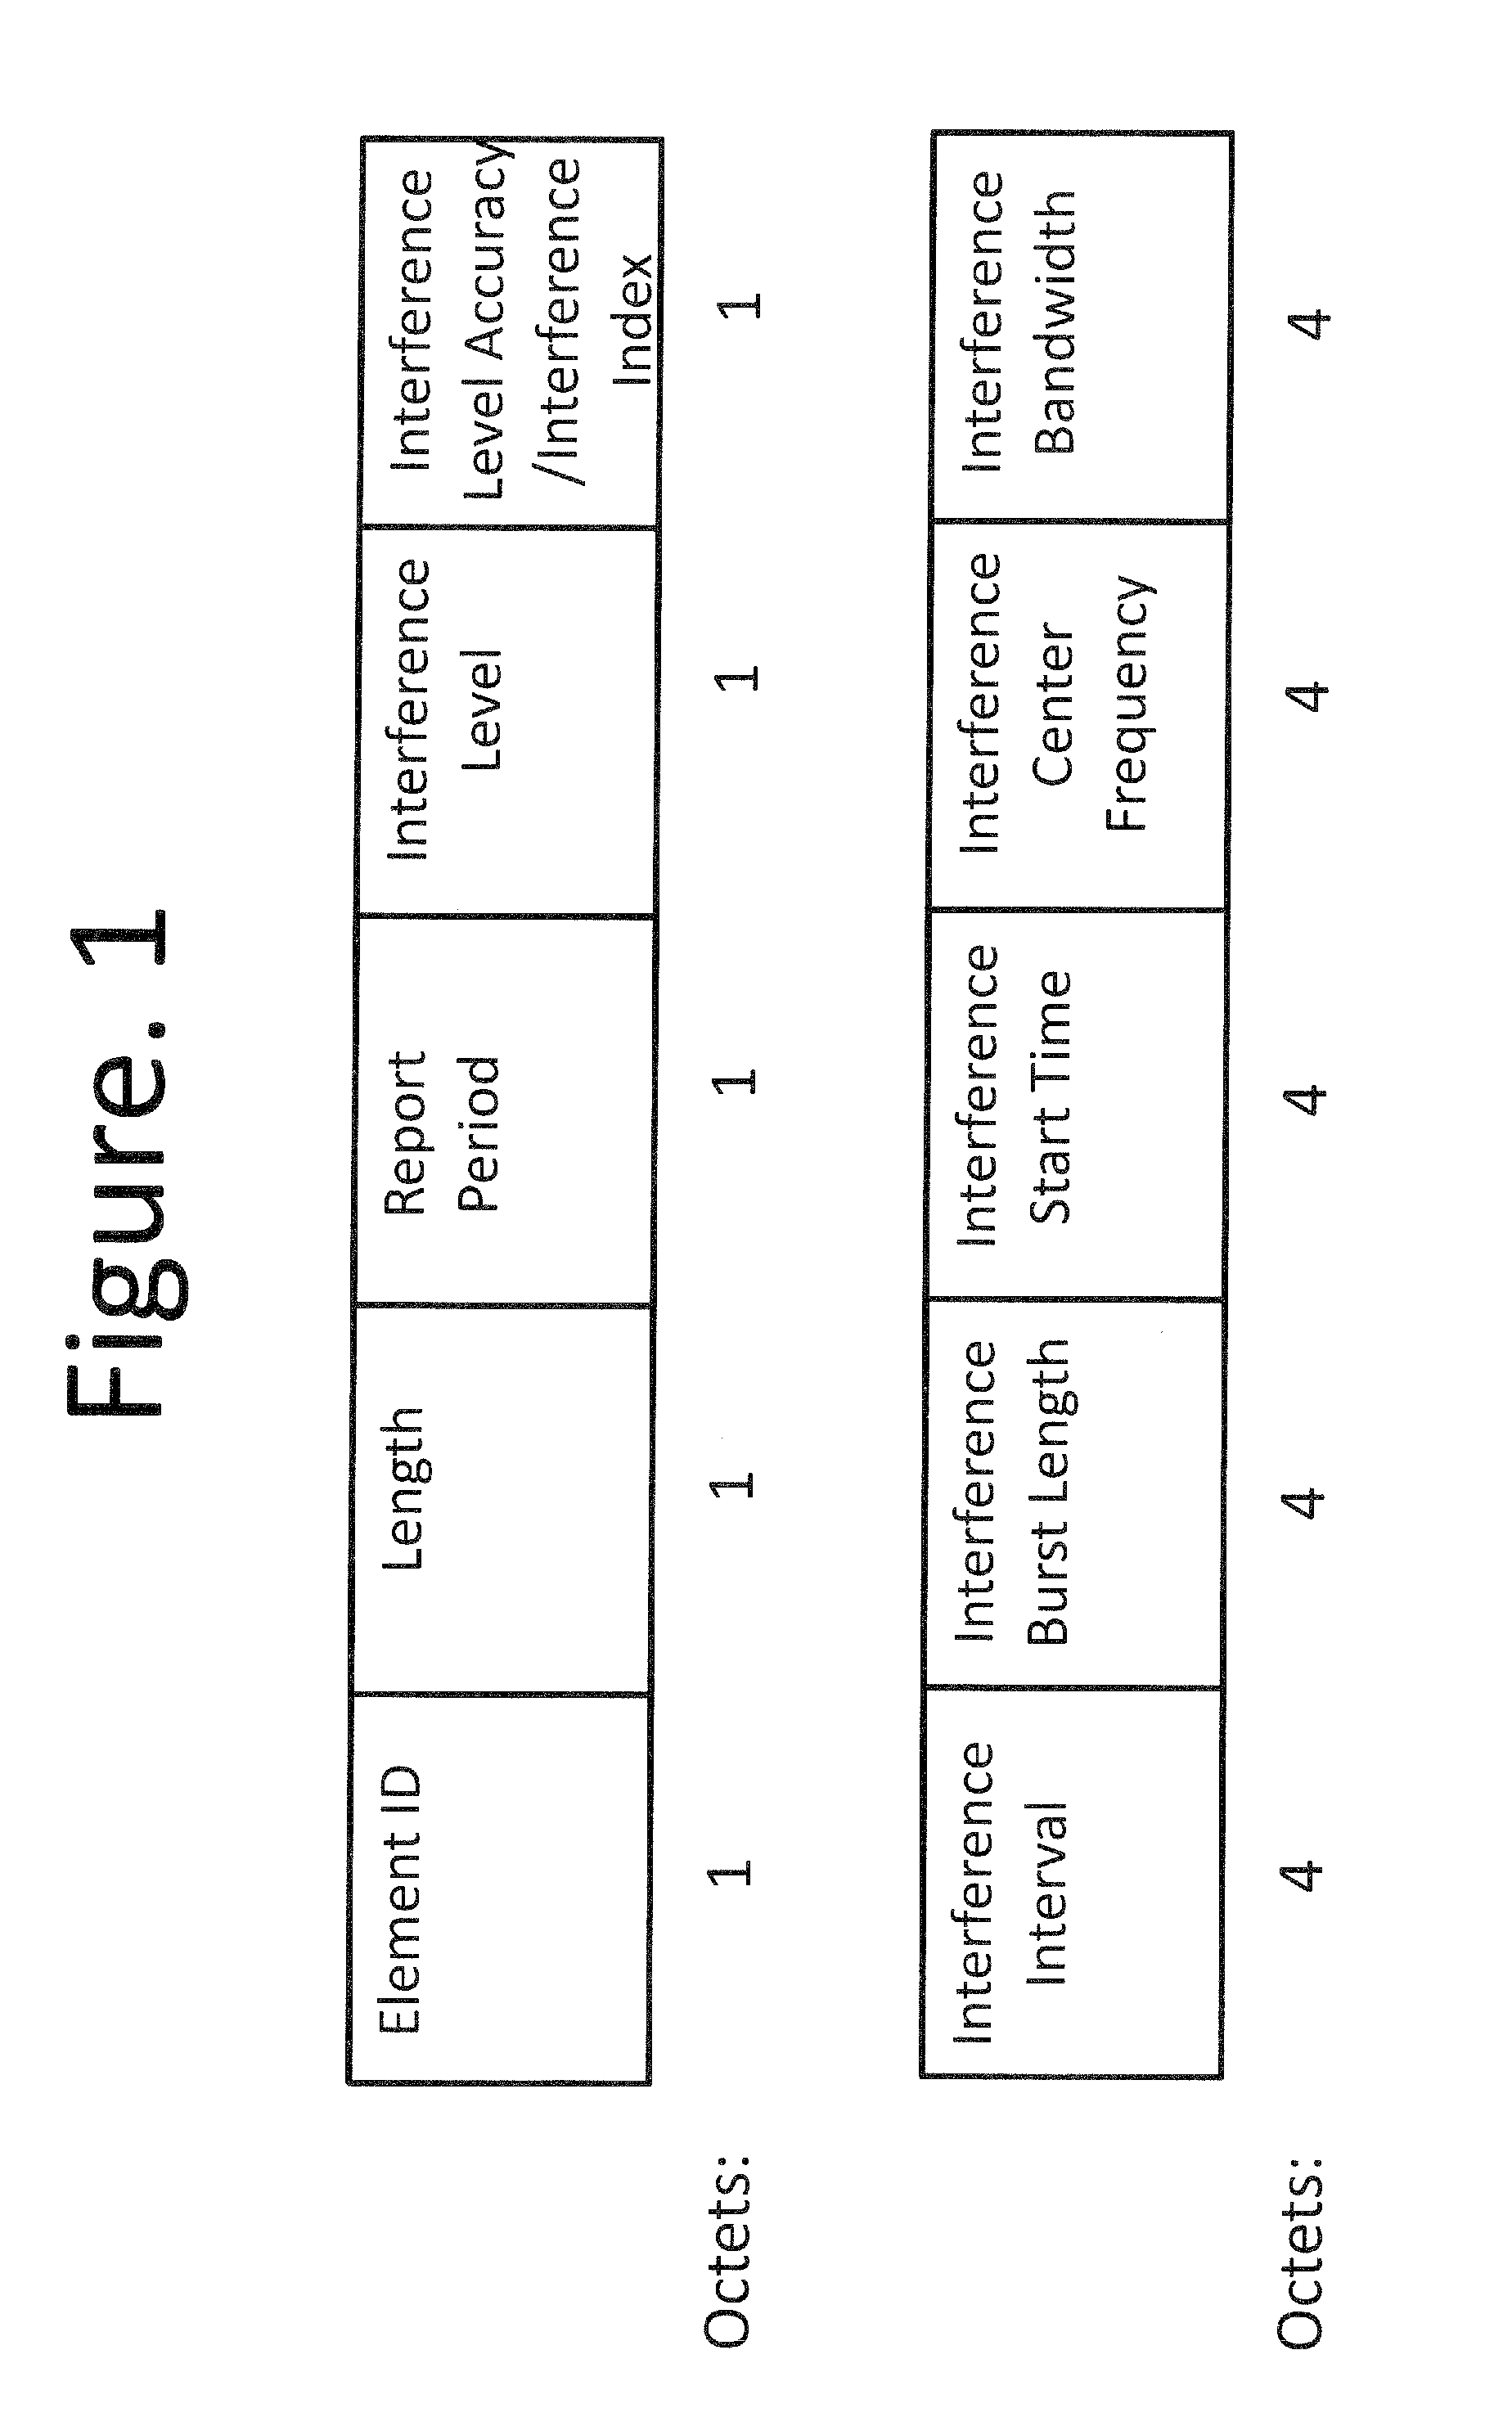 Apparatus and methods for interference mitigation and coordination in a wireless network